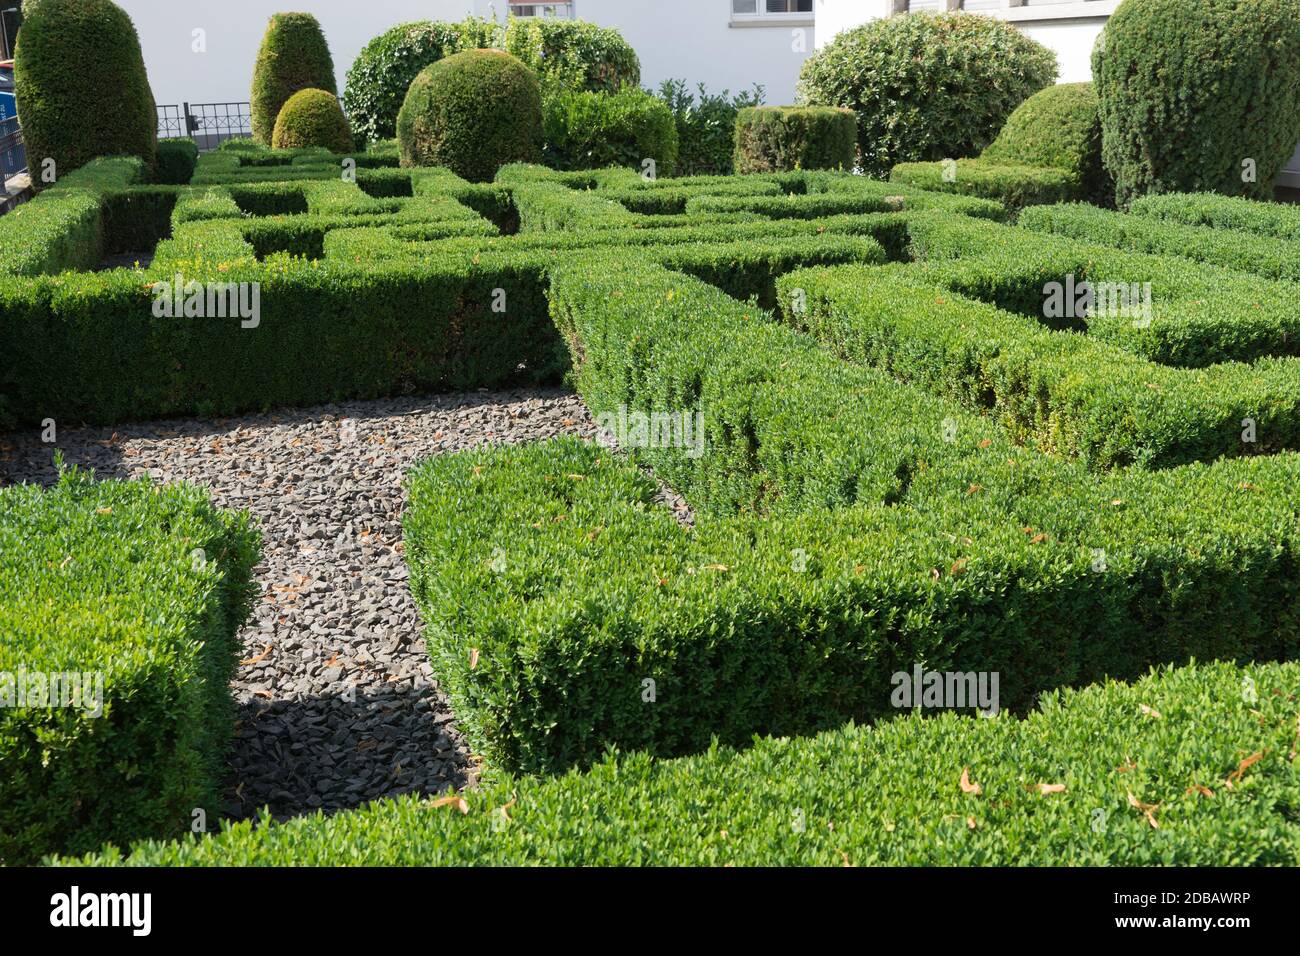 Modern garden architecture with labyrinth of box trees Stock Photo